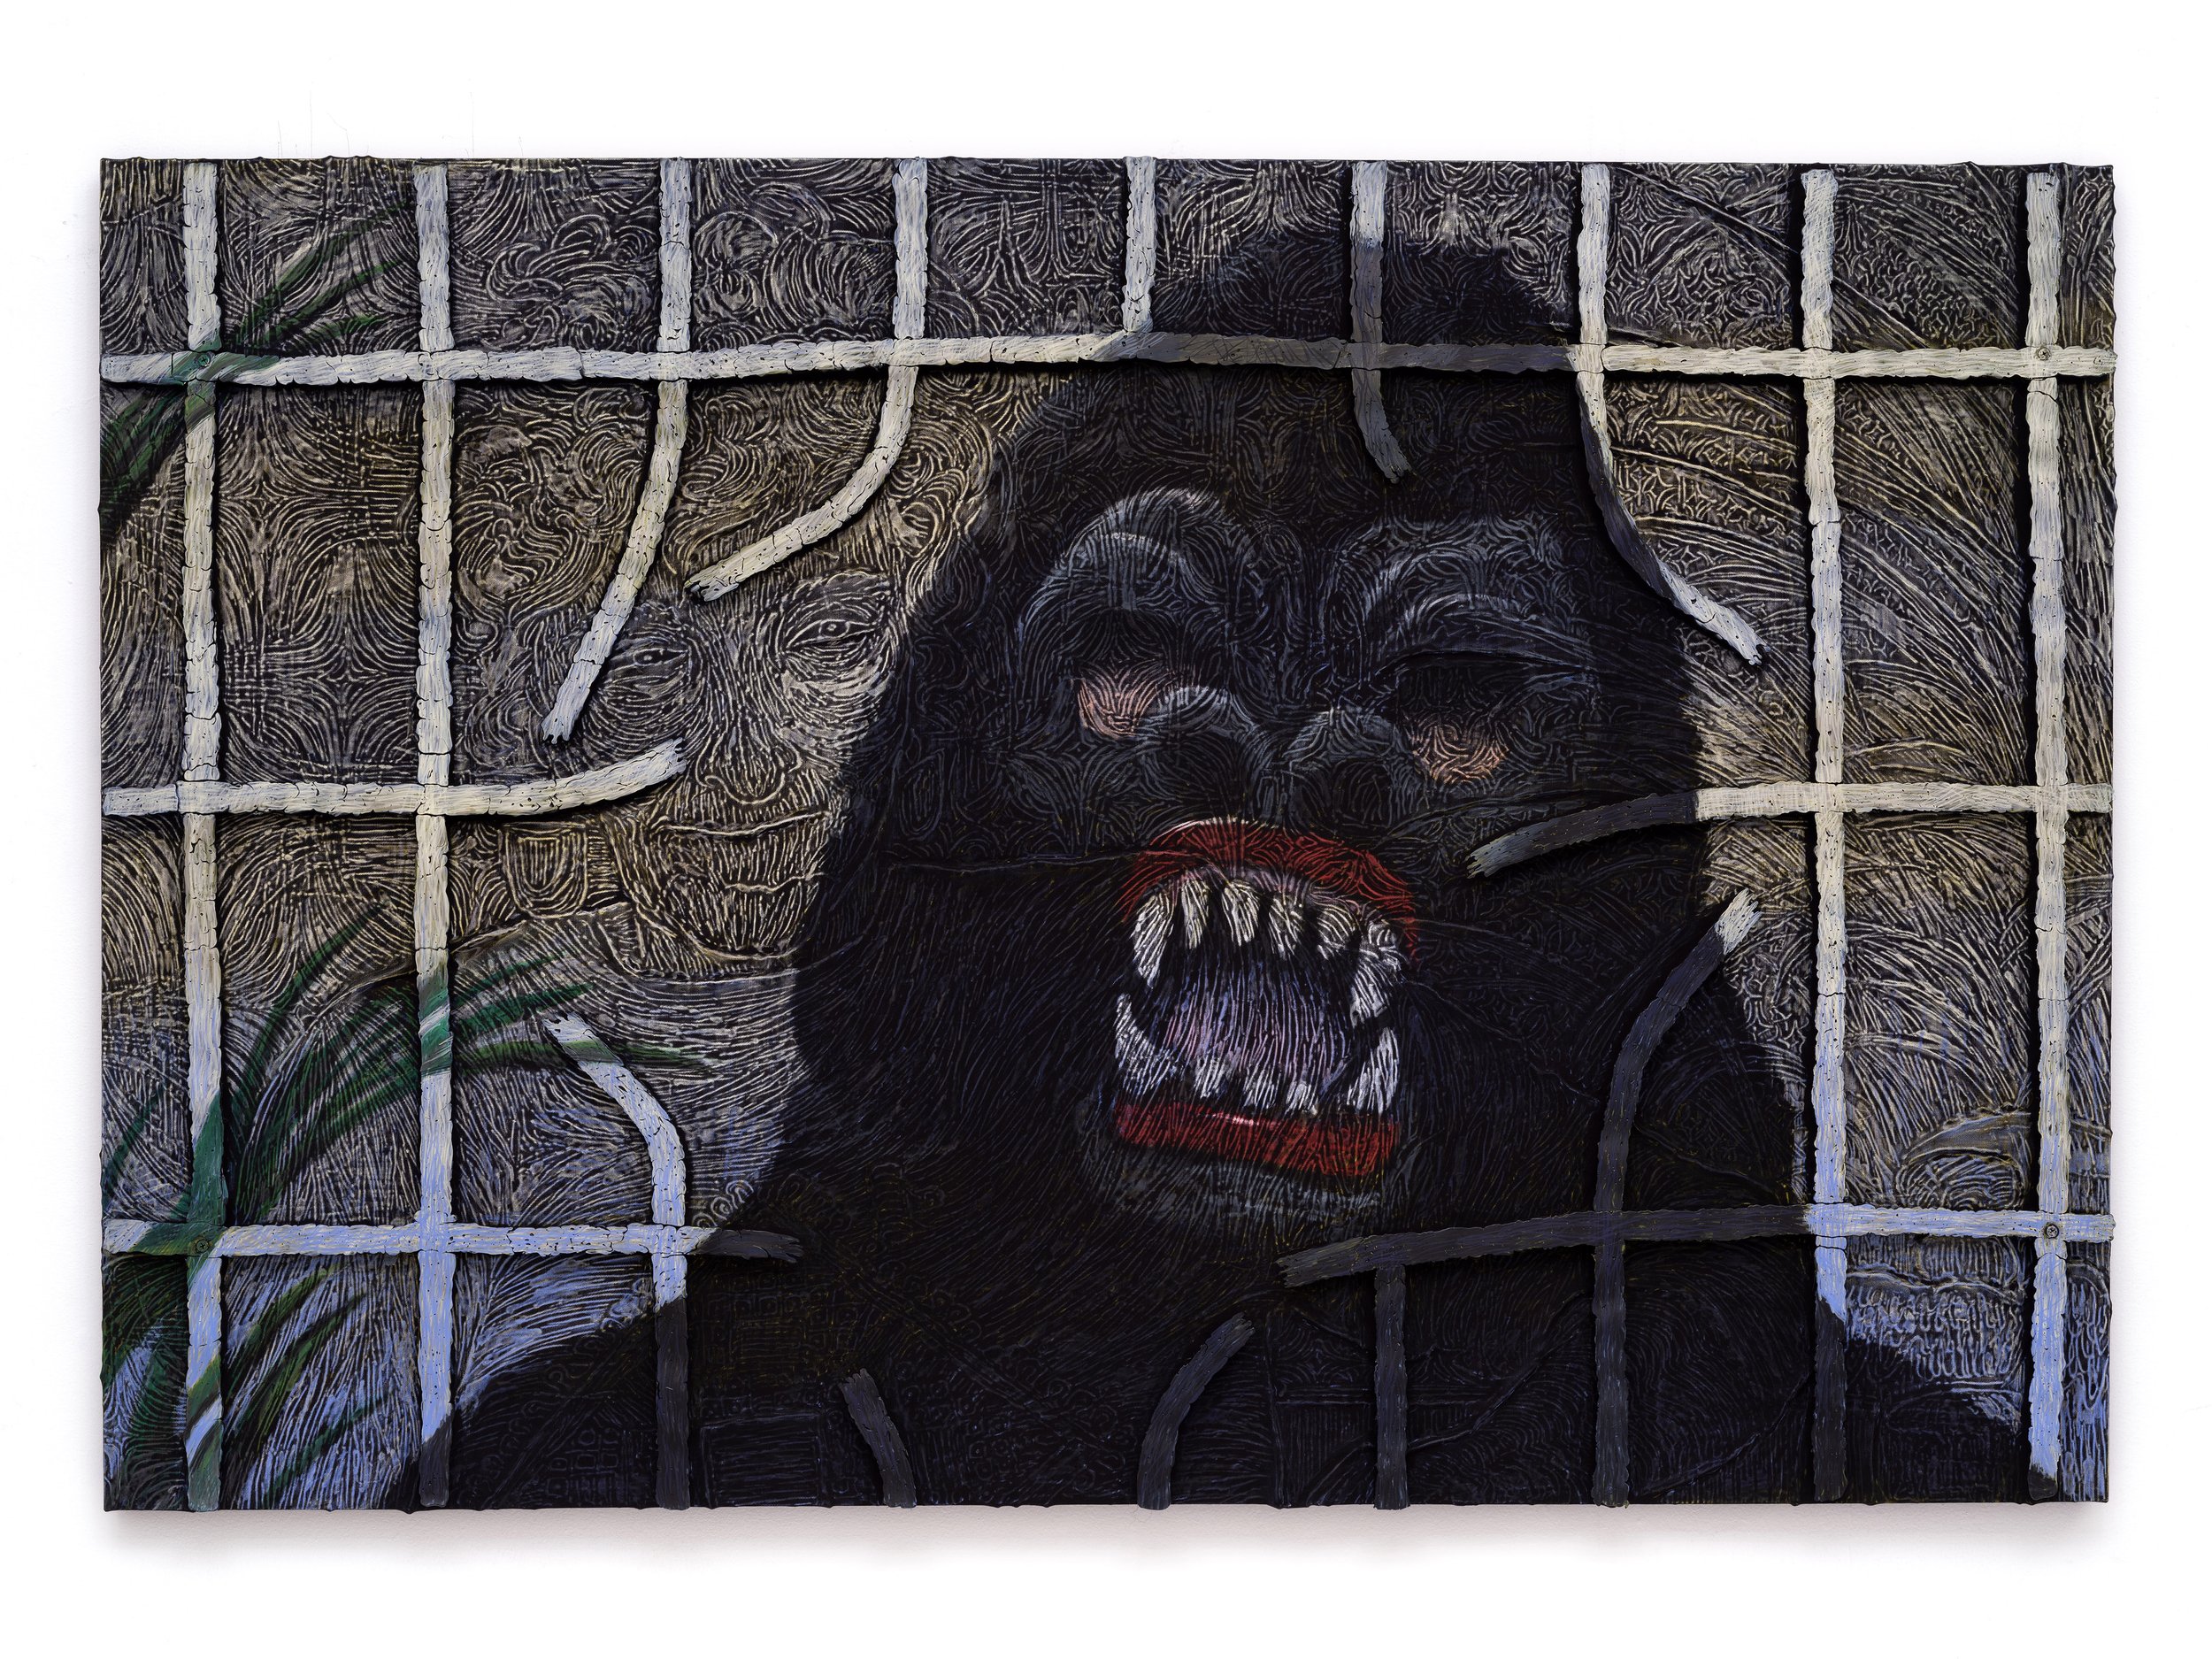   Guerilla Girl / Lucy Lippard , 2023 Hot glue, wax pastel, screws and&nbsp;bleached black canvas on wood panel 40 x 60 x 7 inches 